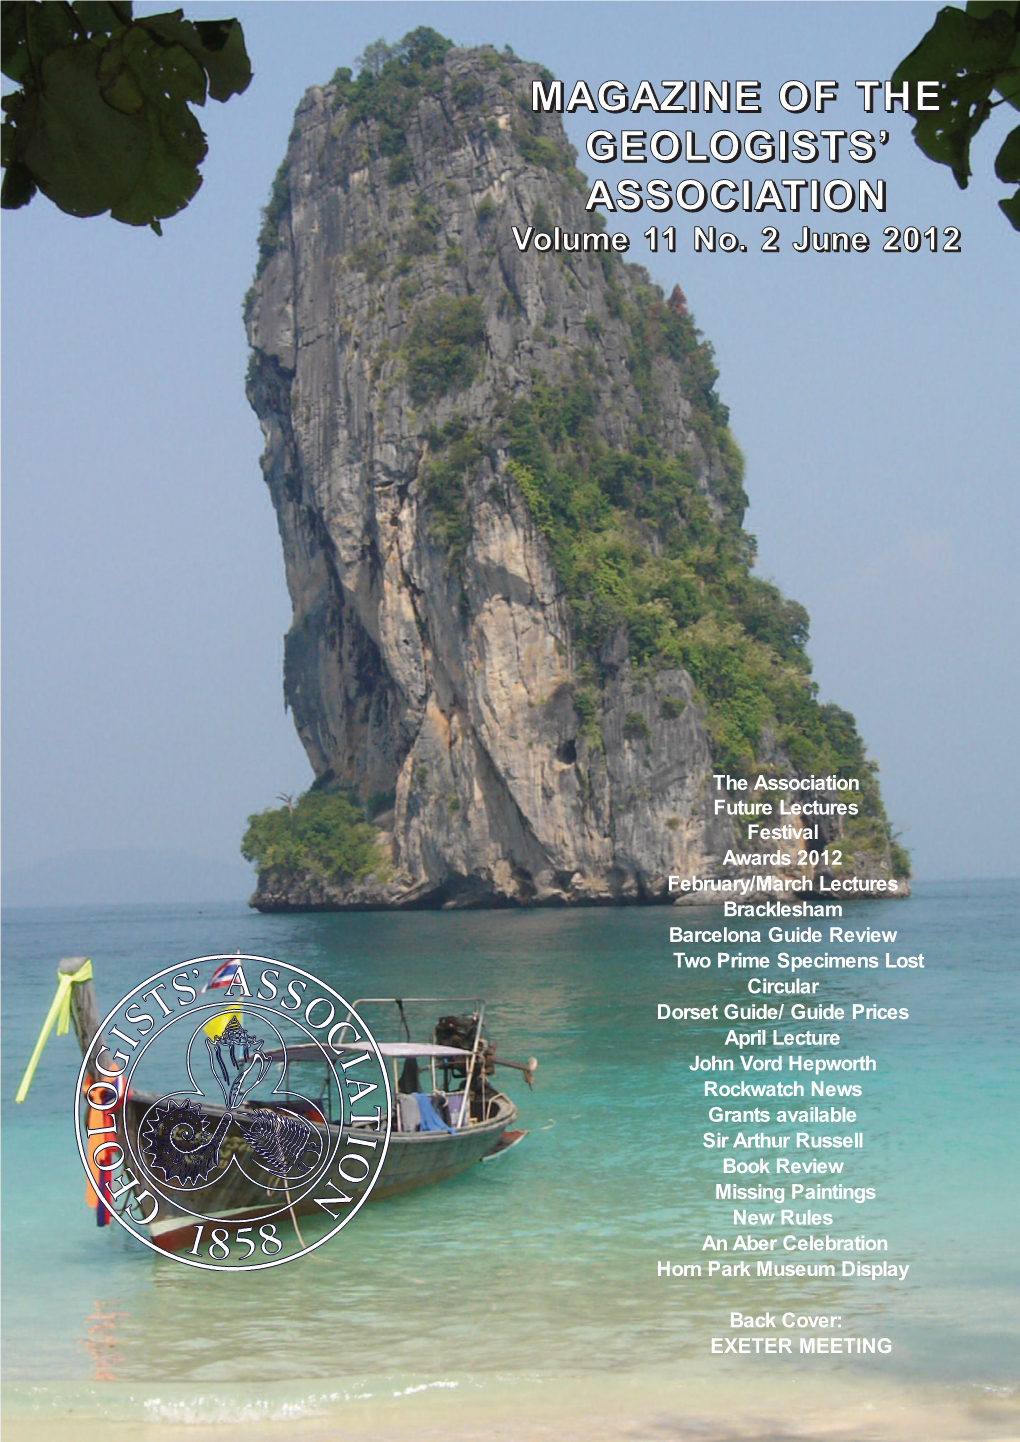 Magazine of the Geologists' Association